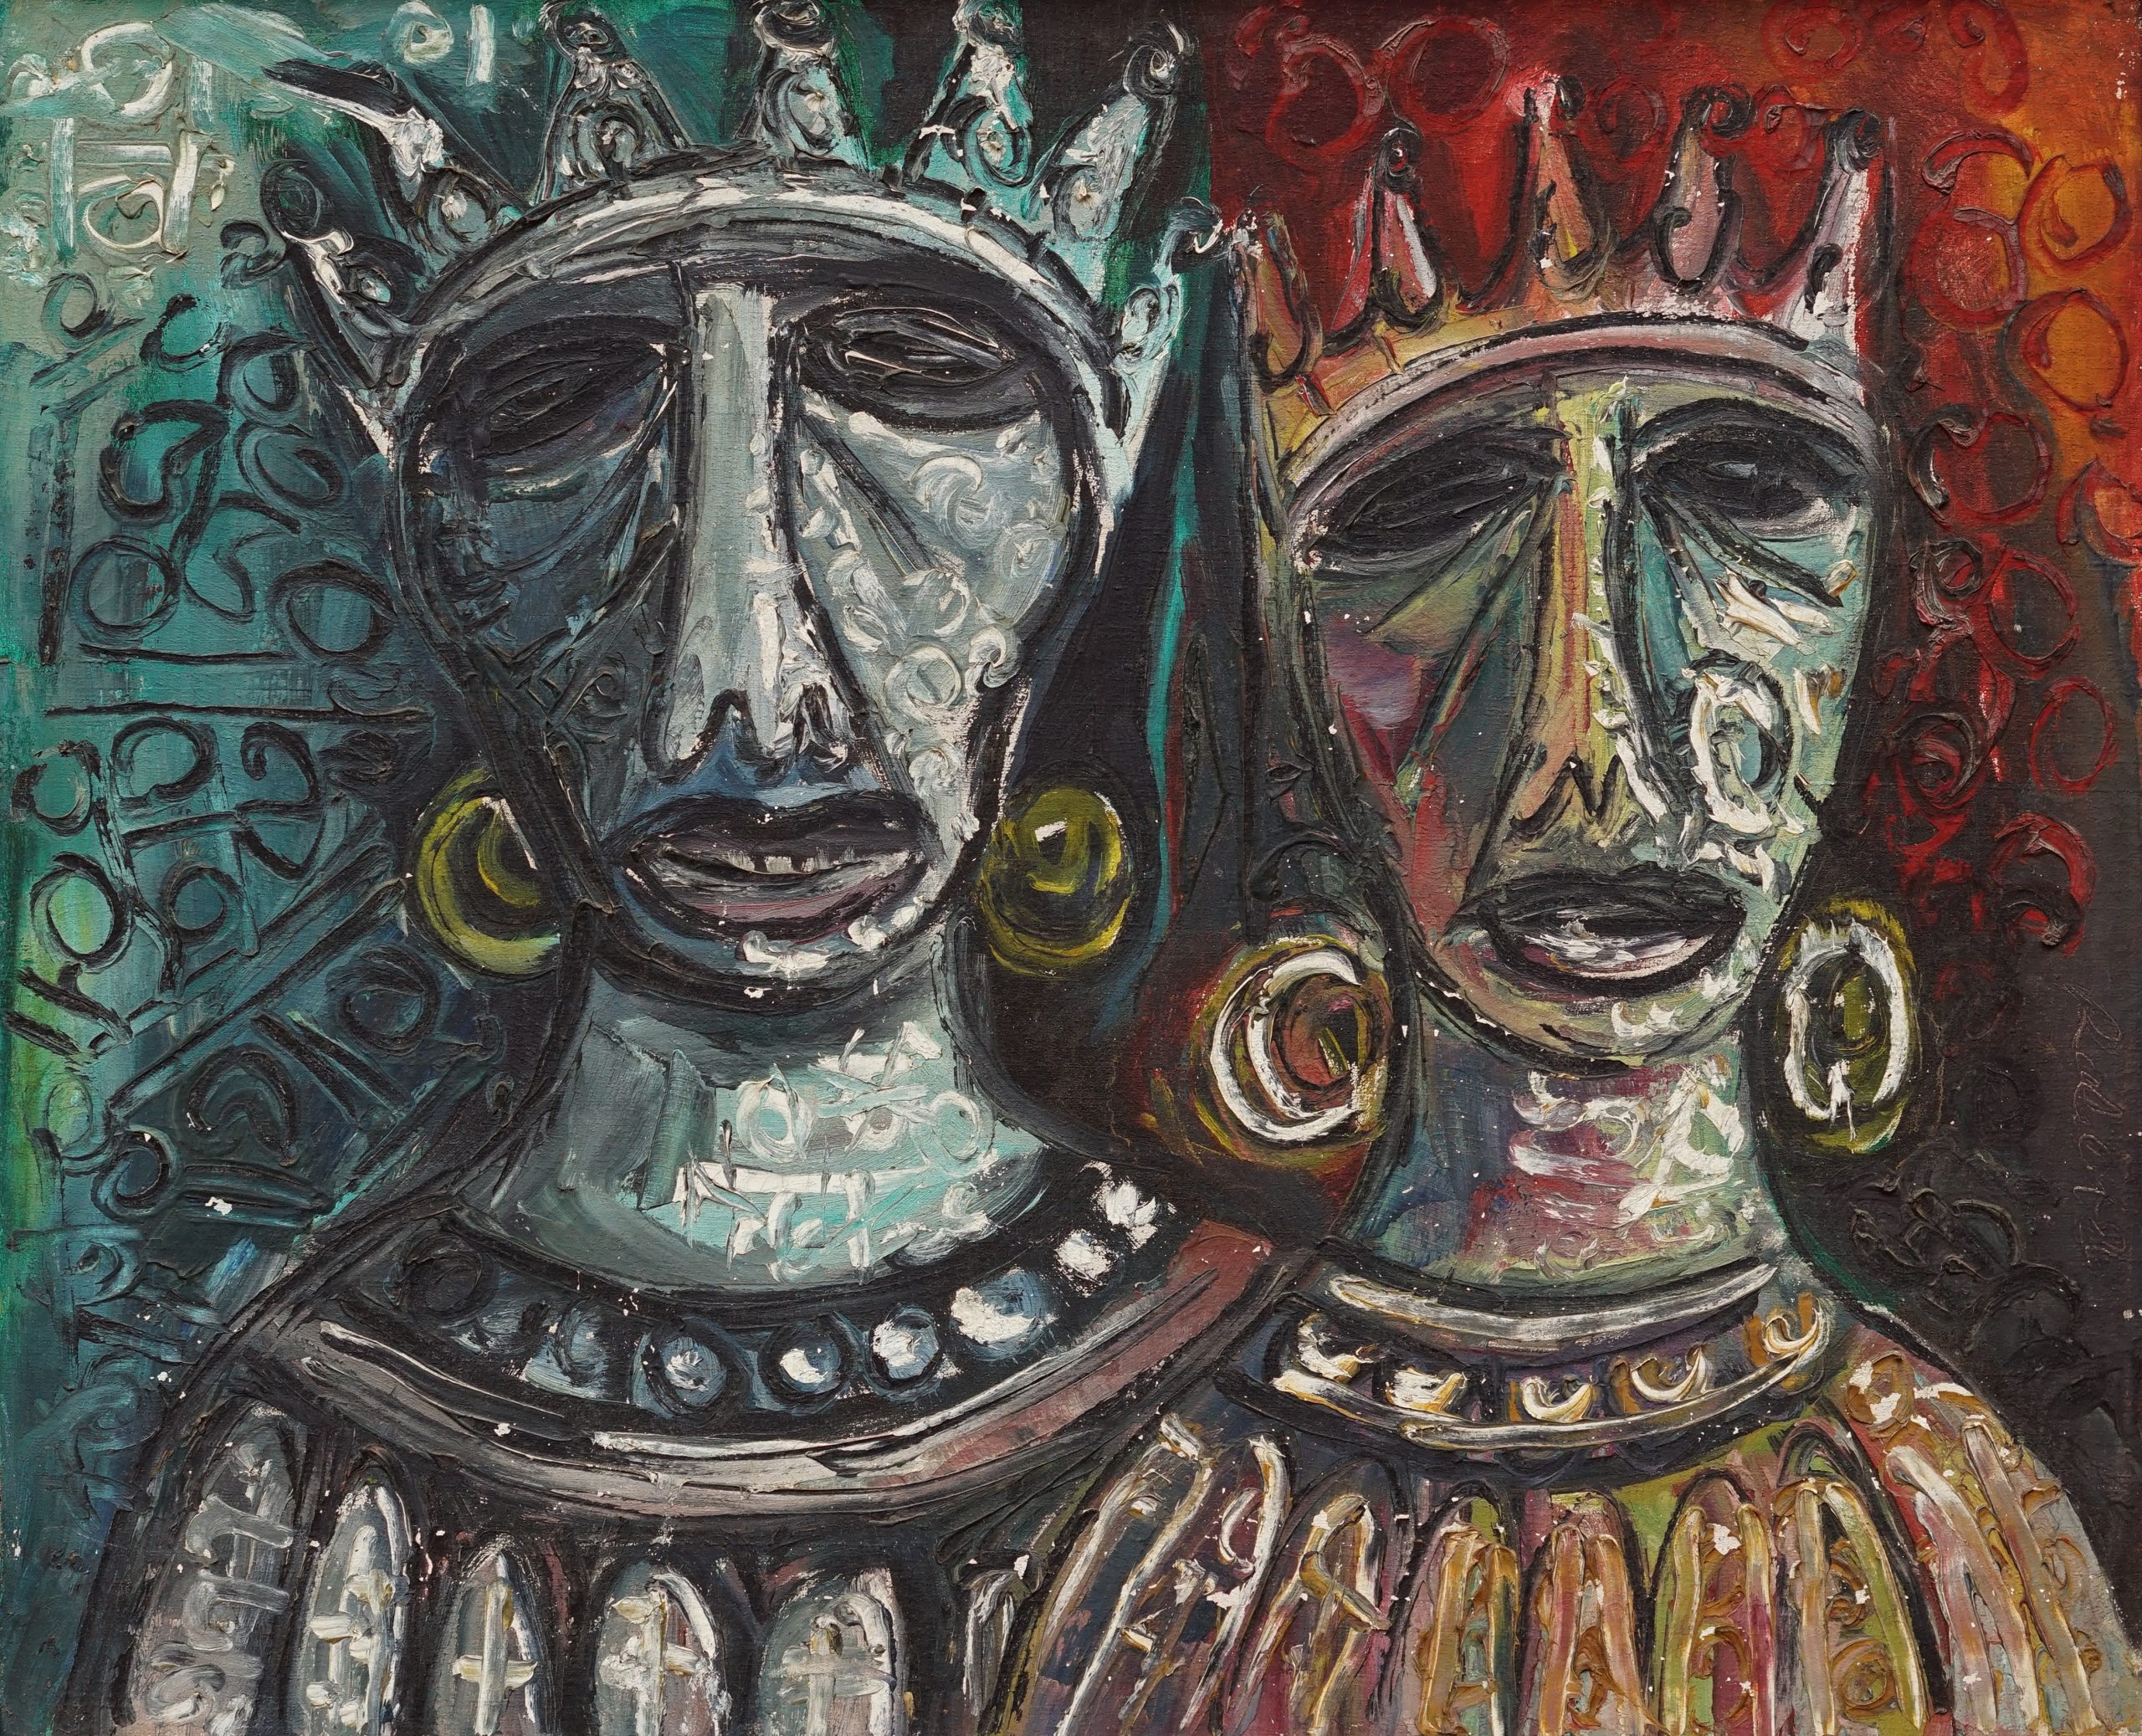 ROBIN MONDAL KING & QUEEN OIL ON CANVAS 20 IN X 24 IN 1986